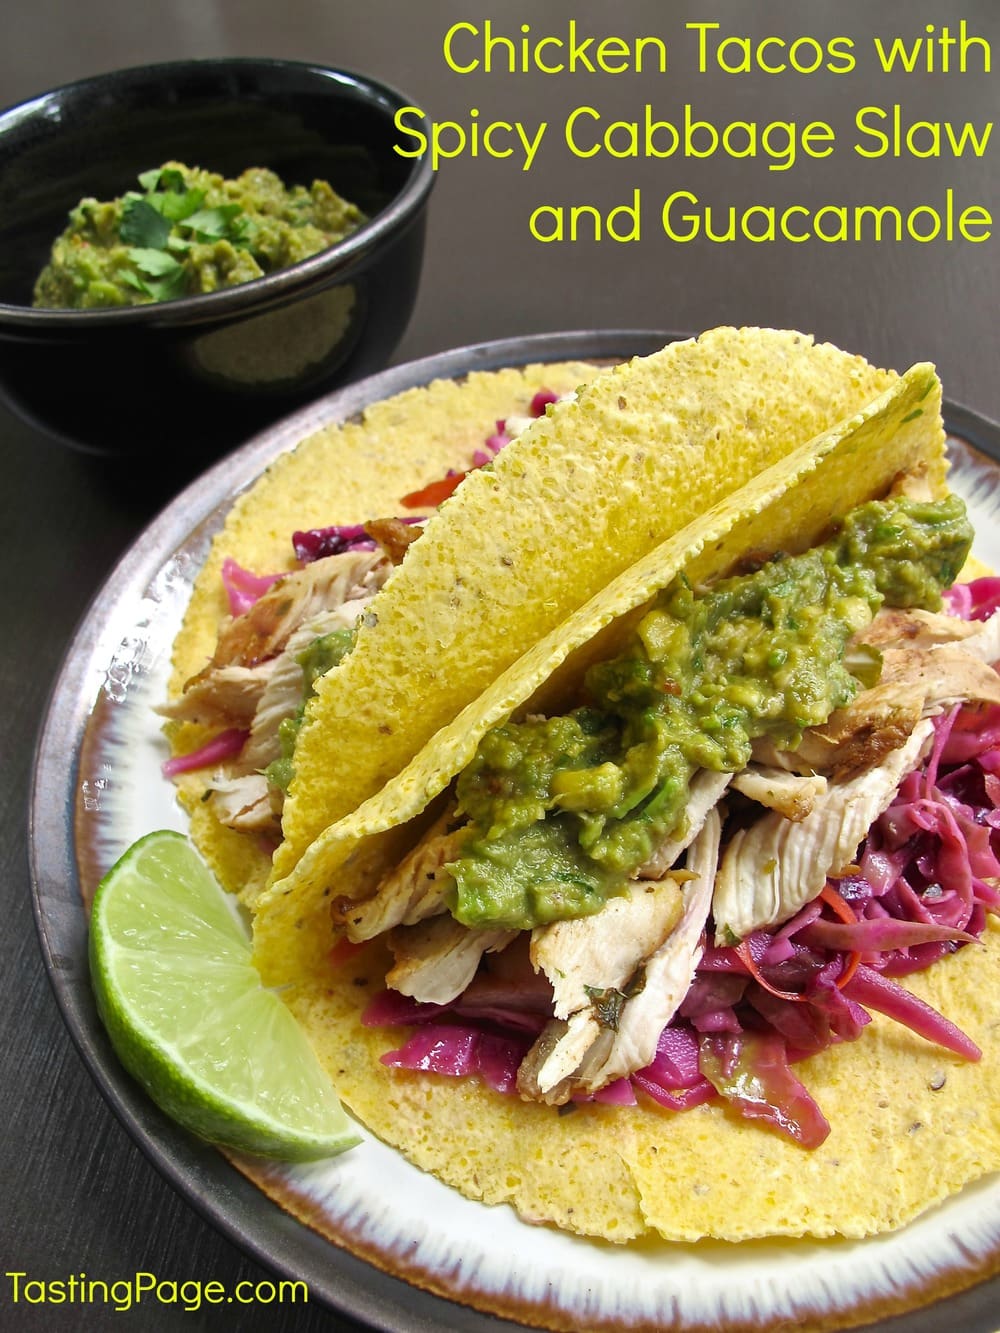 Chicken tacos with spicy cabbage slaw and guacamole